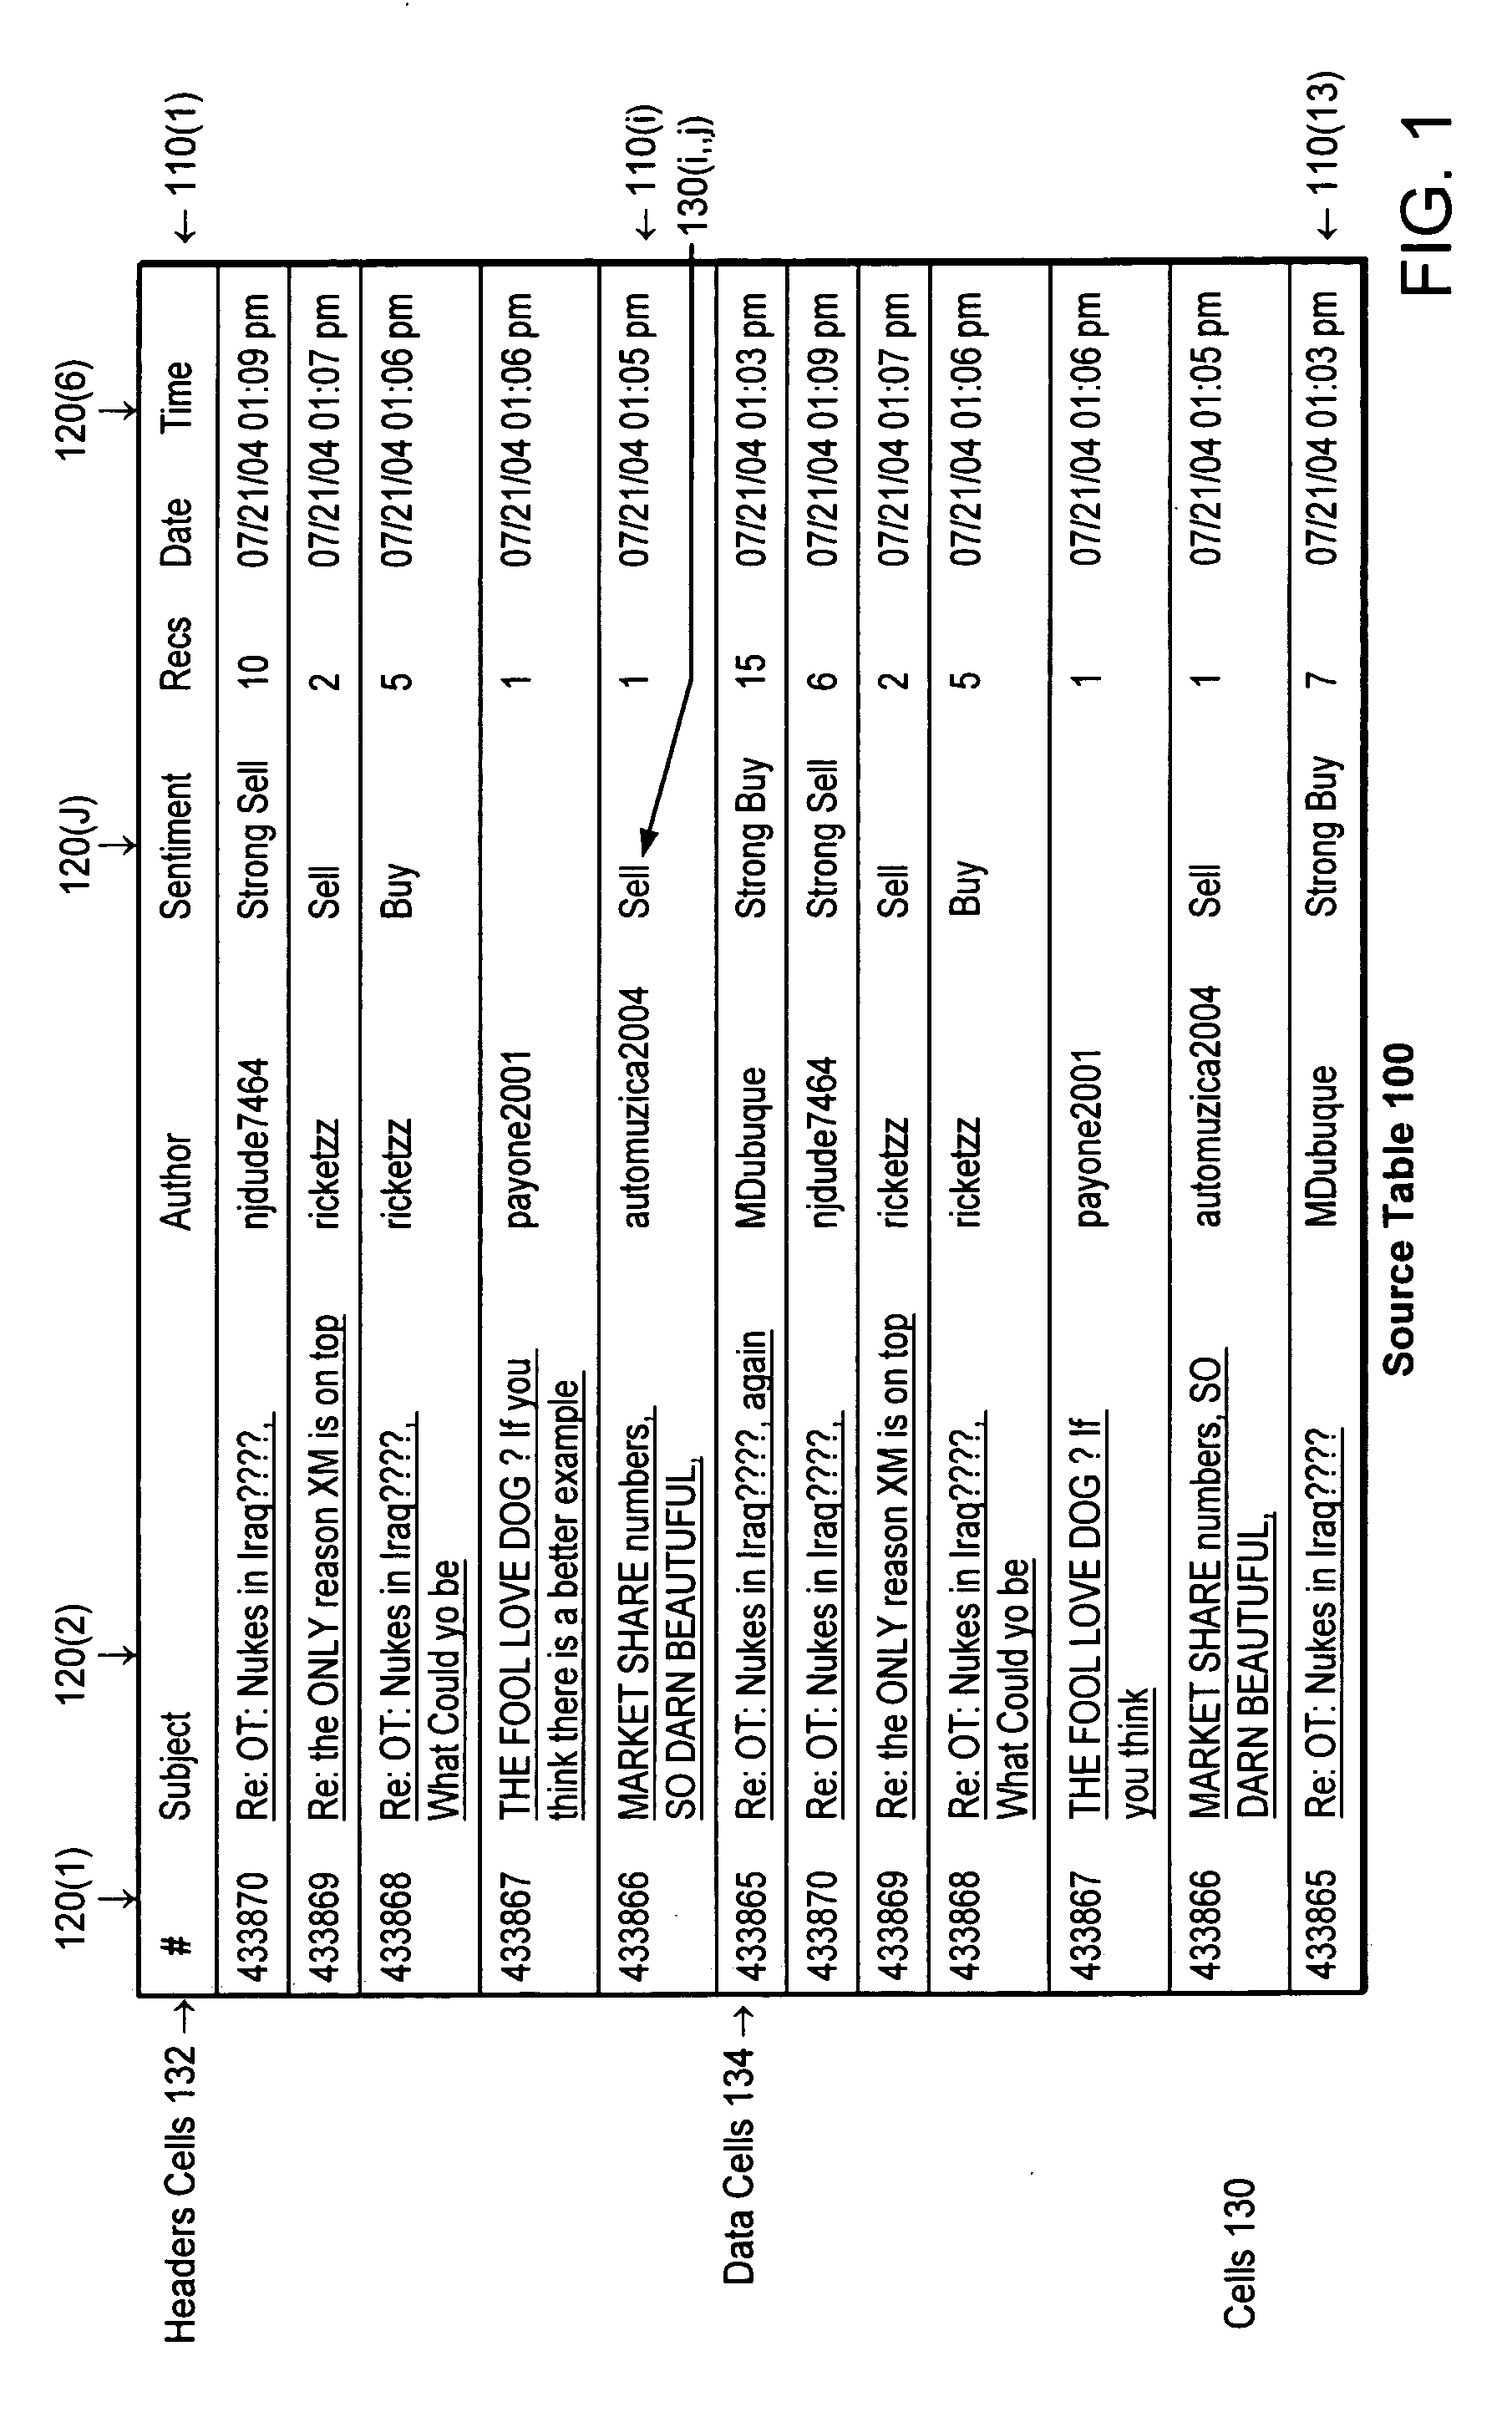 Methods for altering the display of table data suitably for visualization within visible display widths